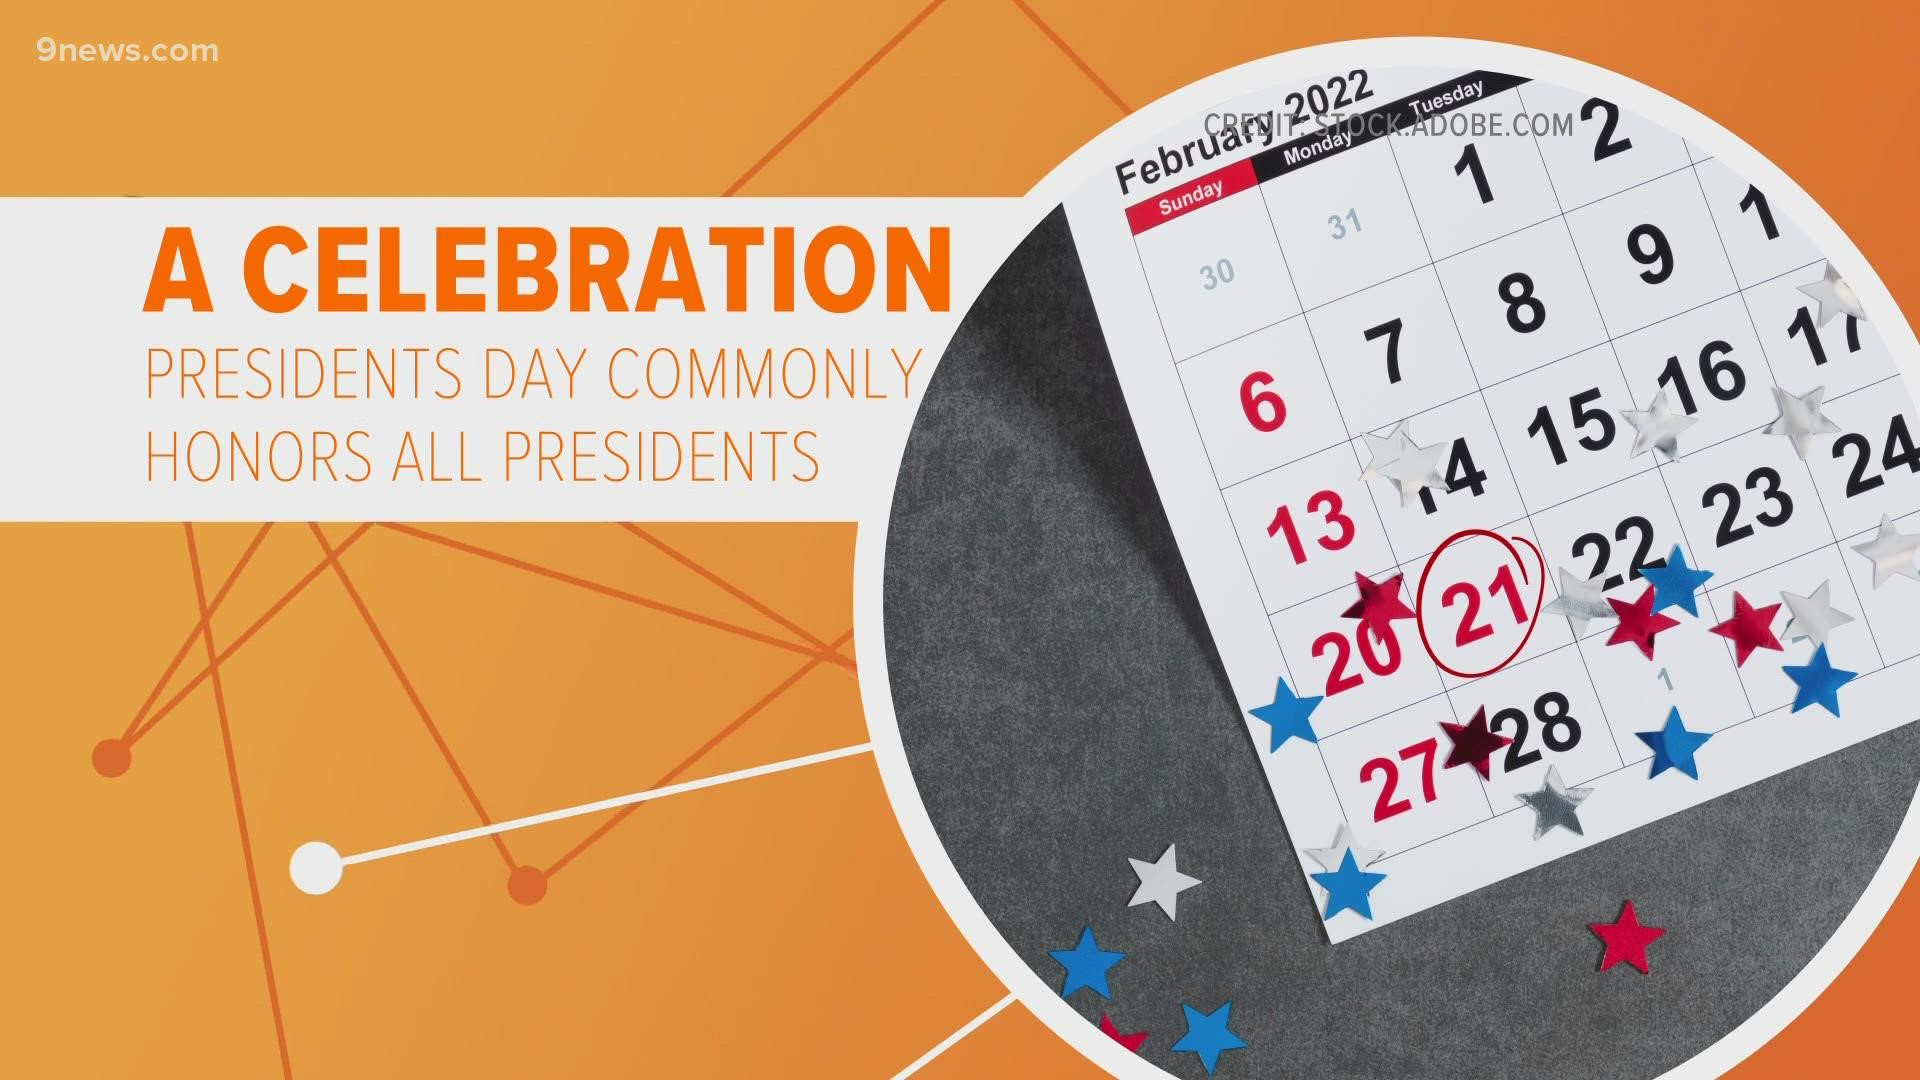 While some states still view the holiday as specific to George Washington, Presidents Day is more commonly seen as a celebration of all U.S. presidents.